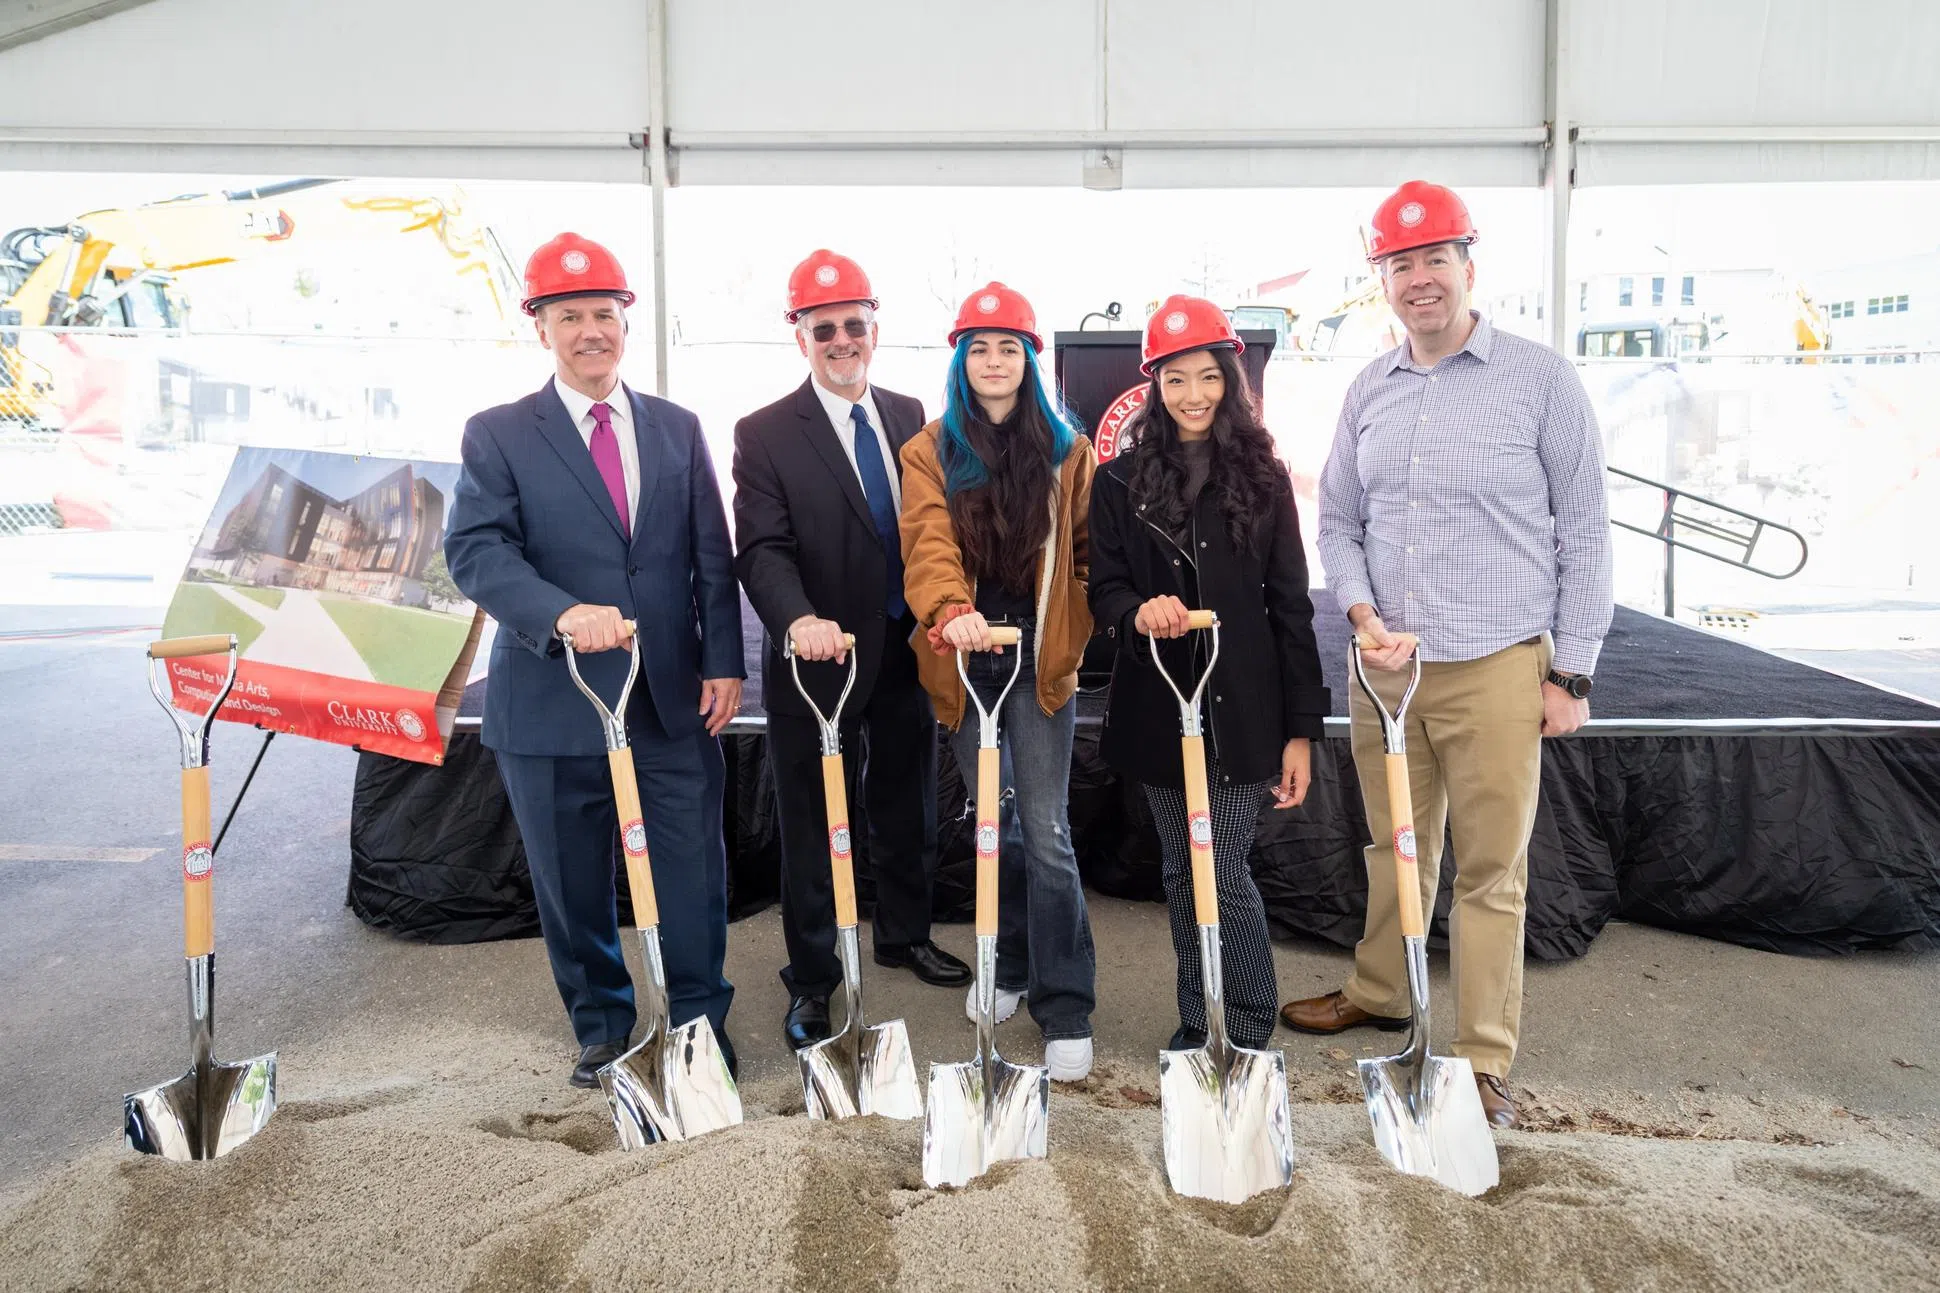 Five people in hardhats with silver shovels at groundbreaking ceremony